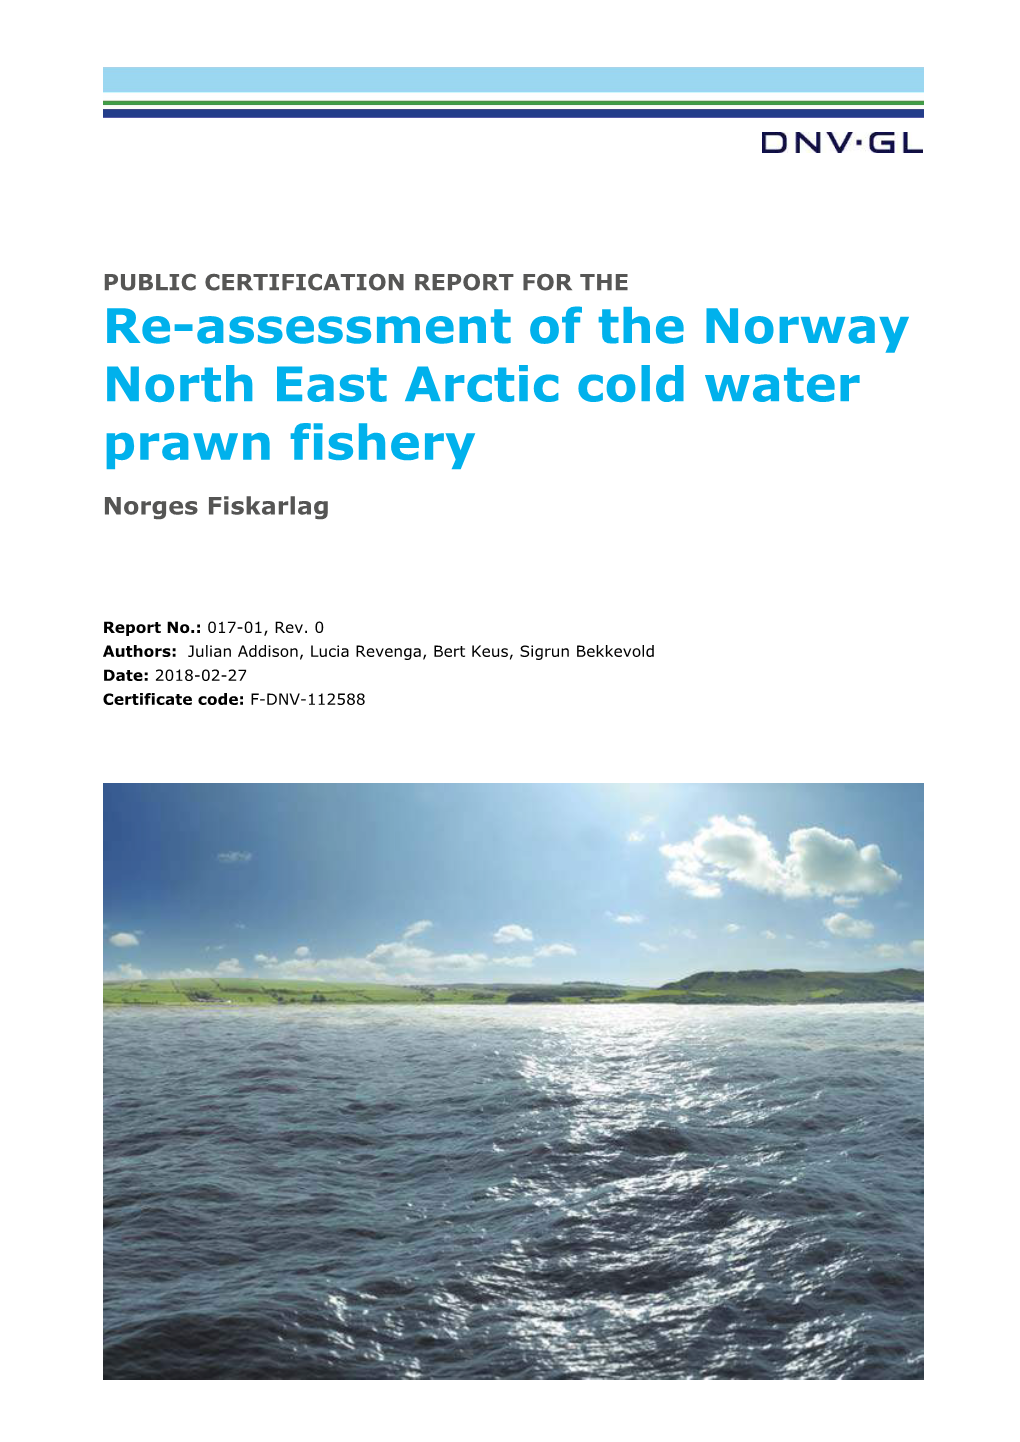 Re-Assessment of the Norway North East Arctic Cold Water Prawn Fishery